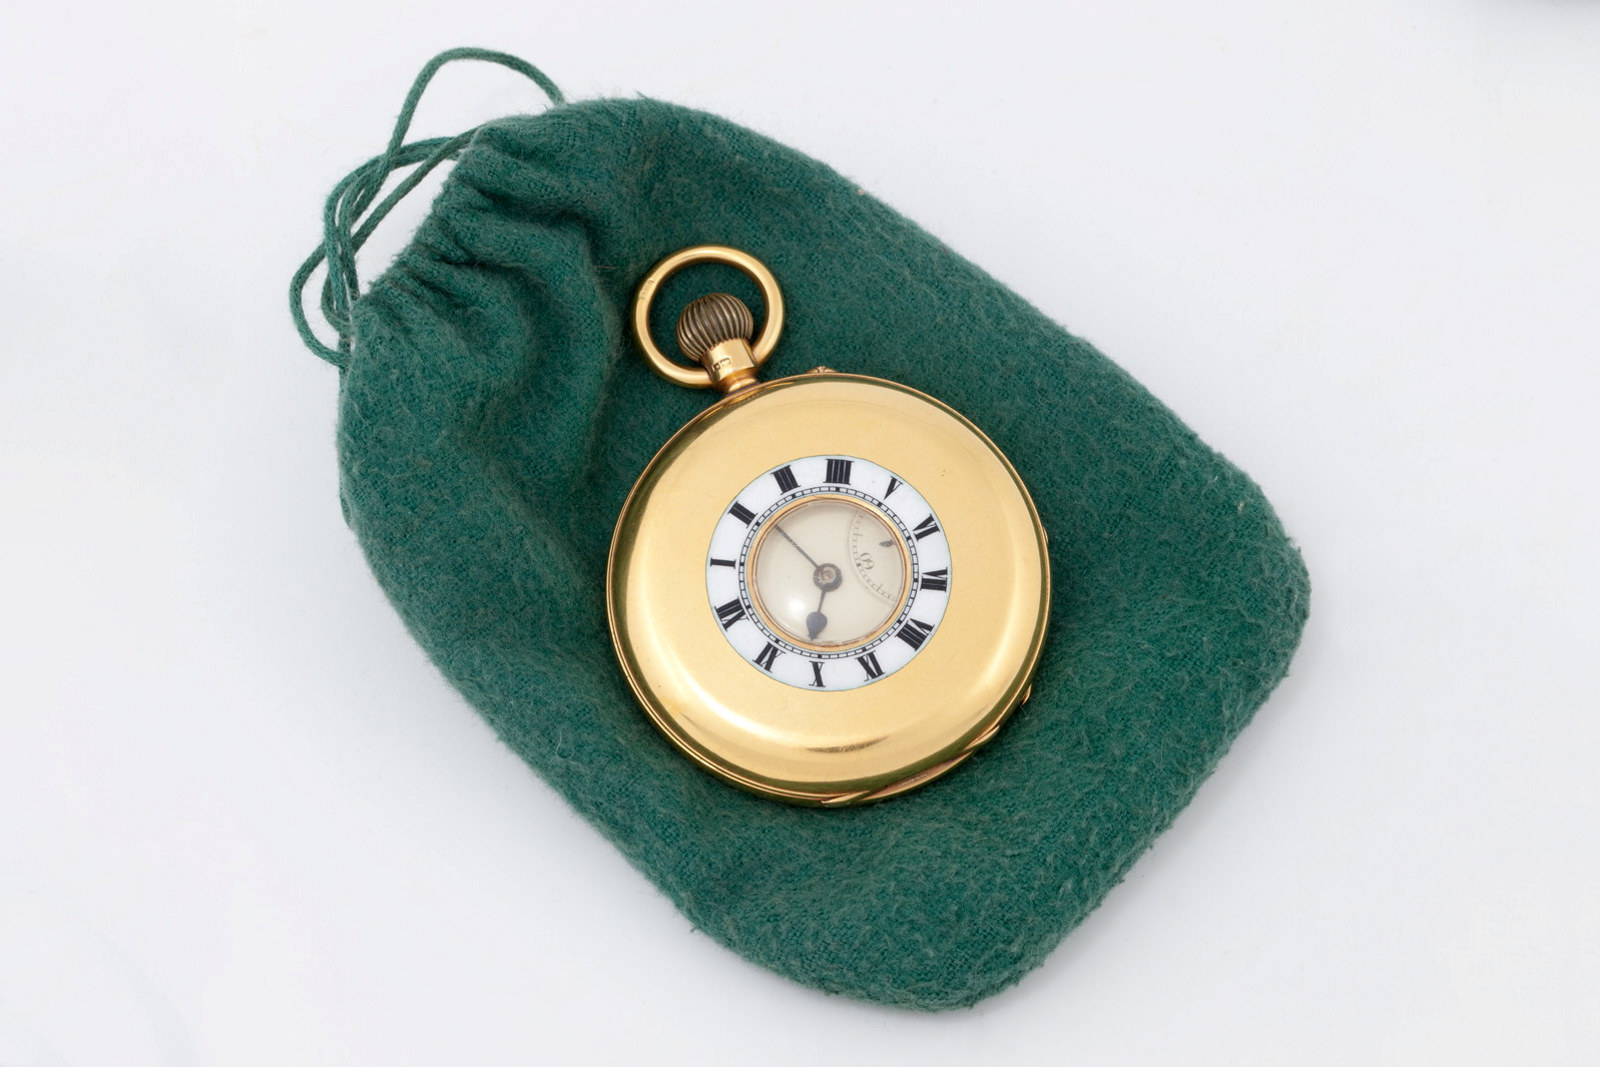 Gold pocket watch presented to magistrate Charles Jennings on his retirement, 26 November 1926